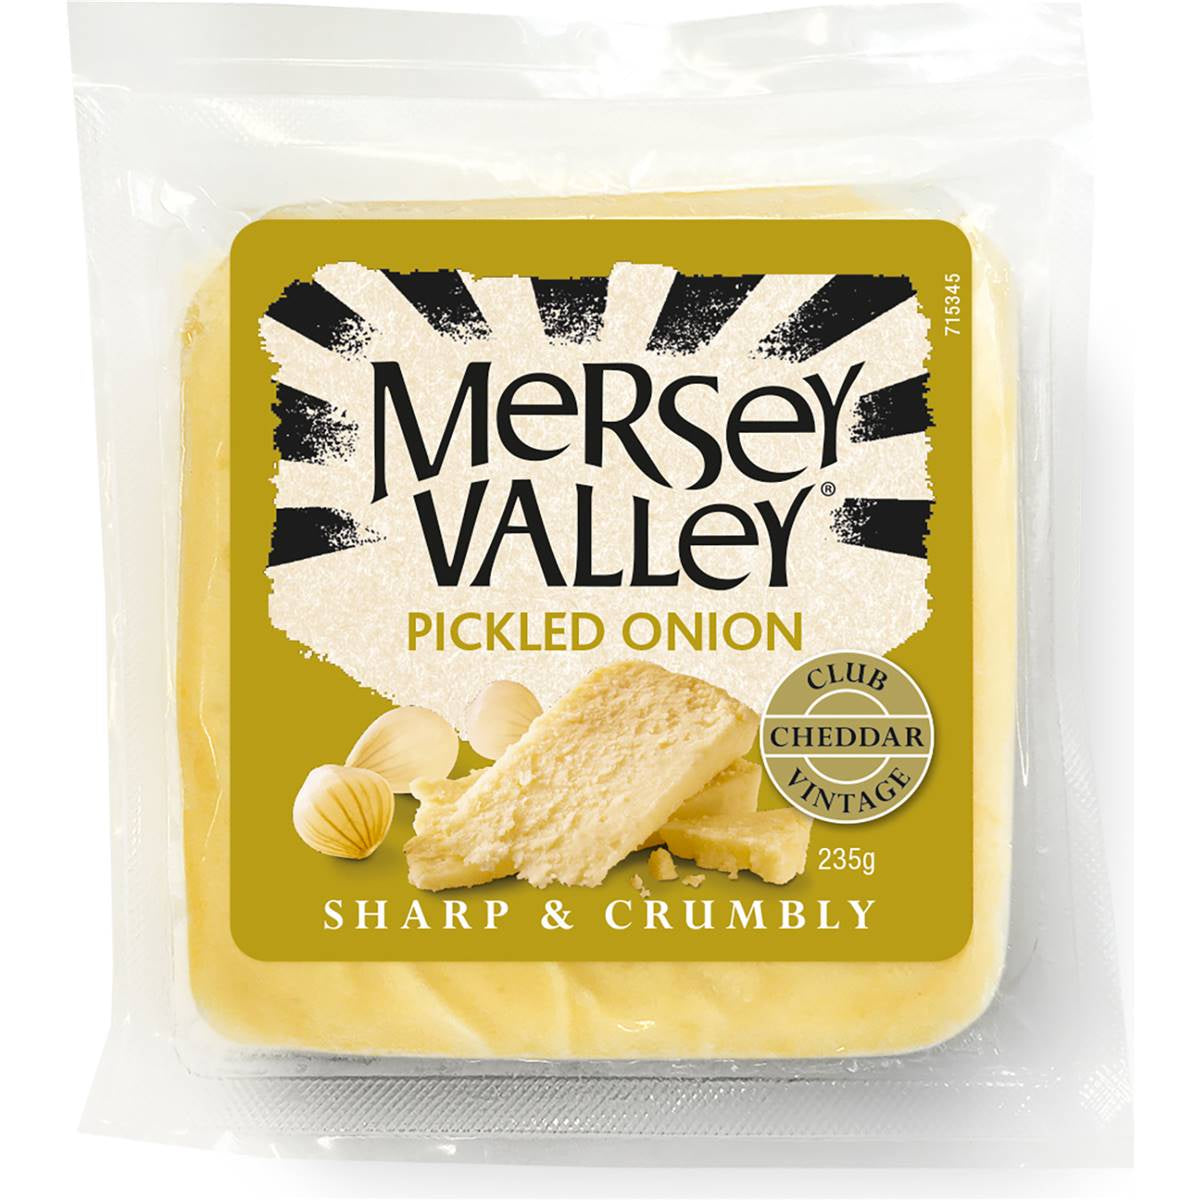 Mersey Valley Pickled Onion Cheddar Cheese 235g